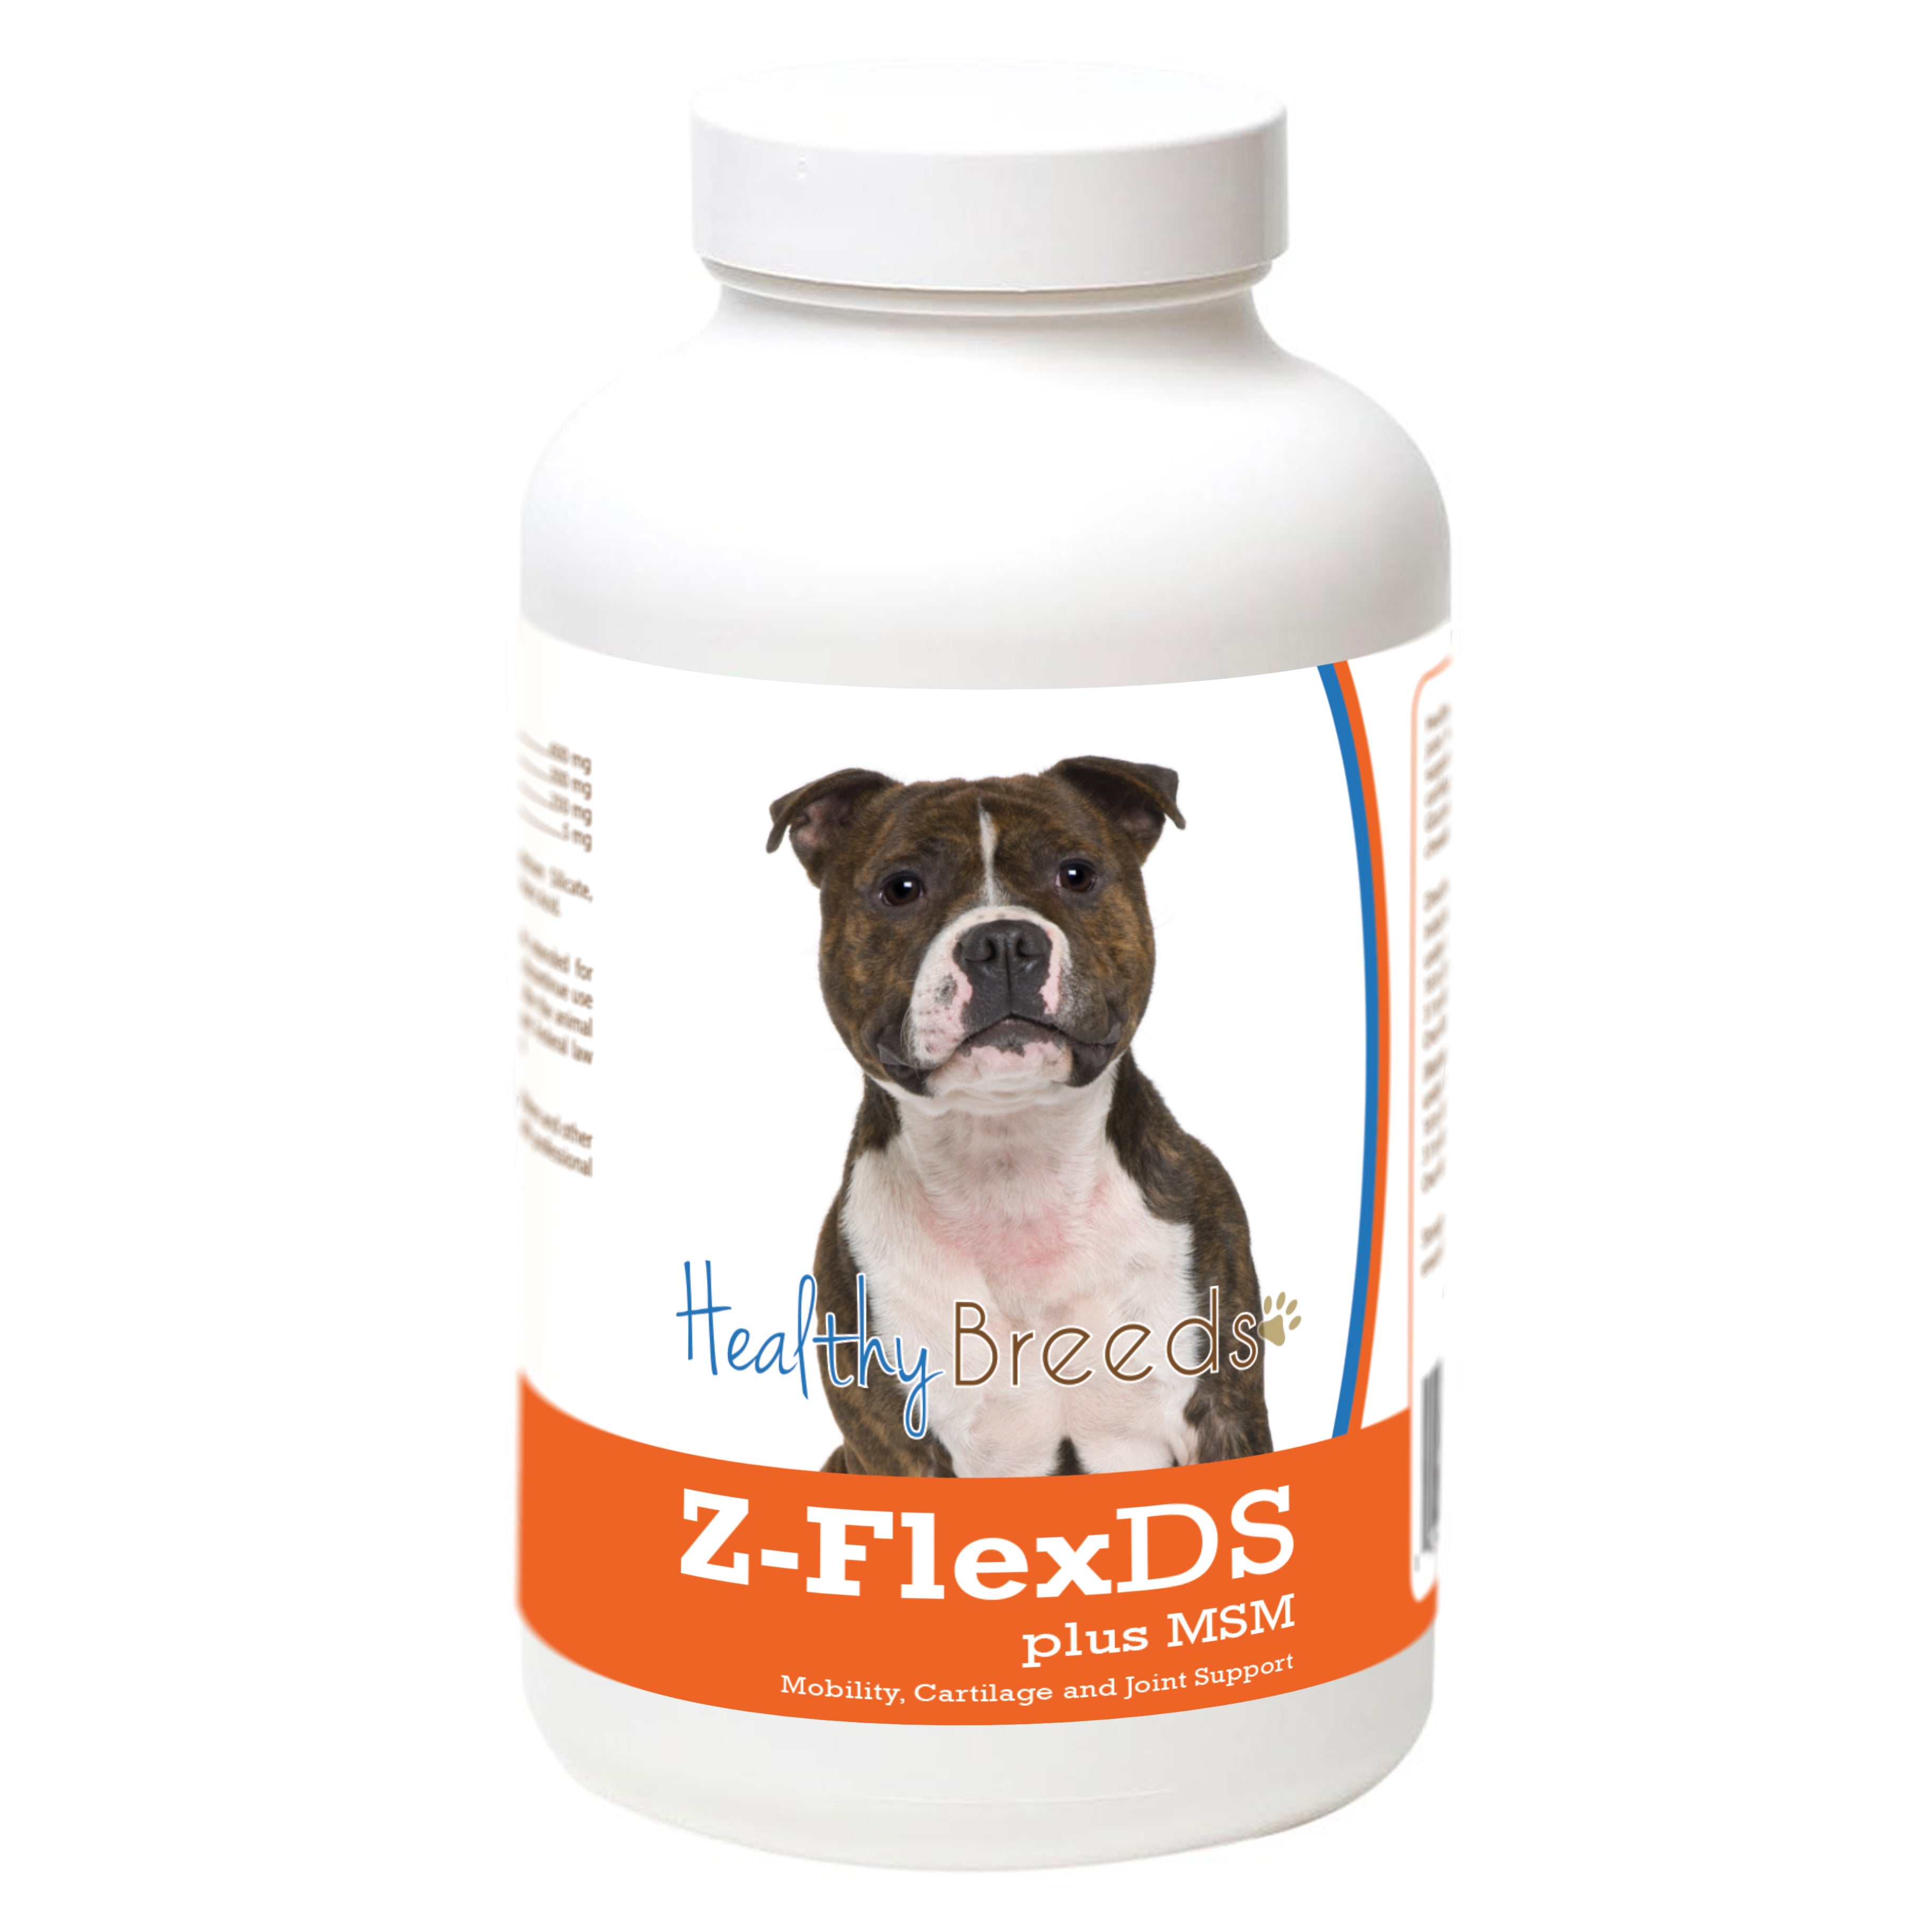 Staffordshire Bull Terrier Z-FlexDS plus MSM Chewable Tablets 60 Count